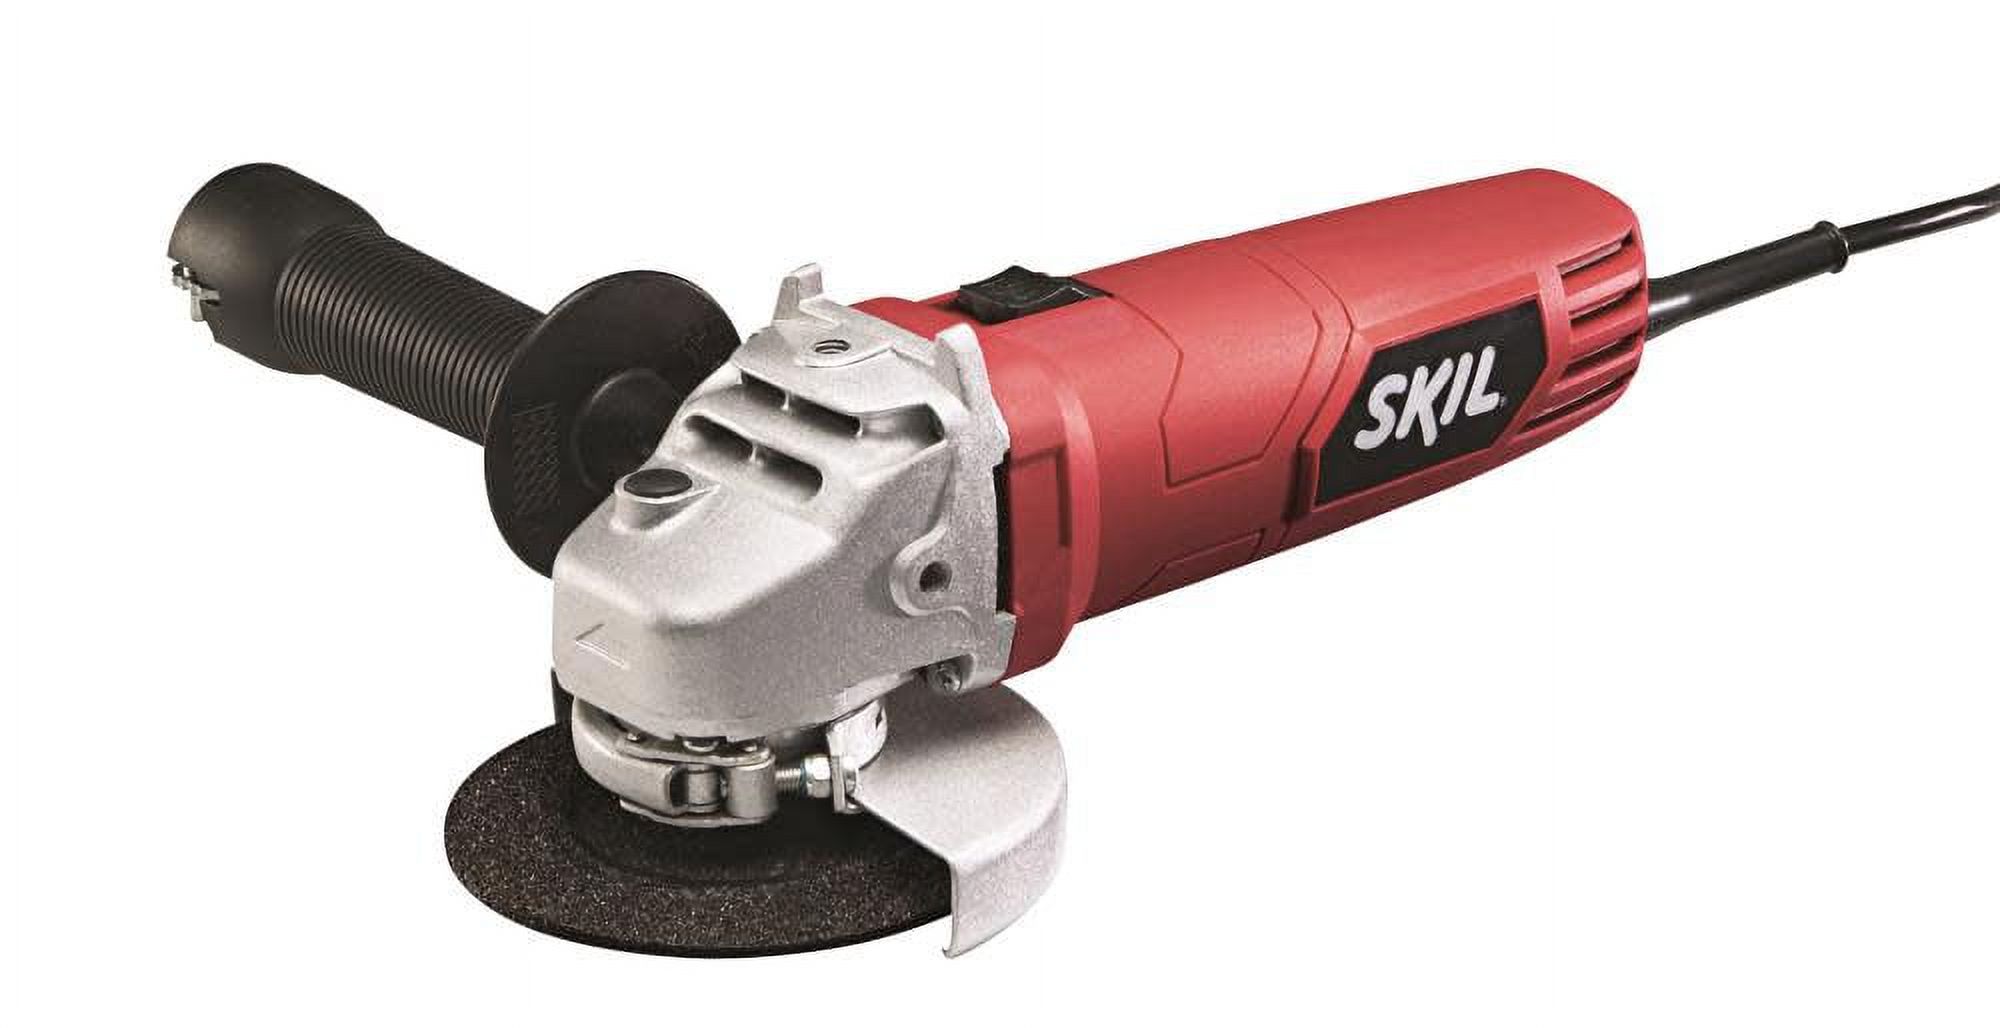 SKIL 6 amps Corded 4-1/2 in. Angle Grinder - image 1 of 2